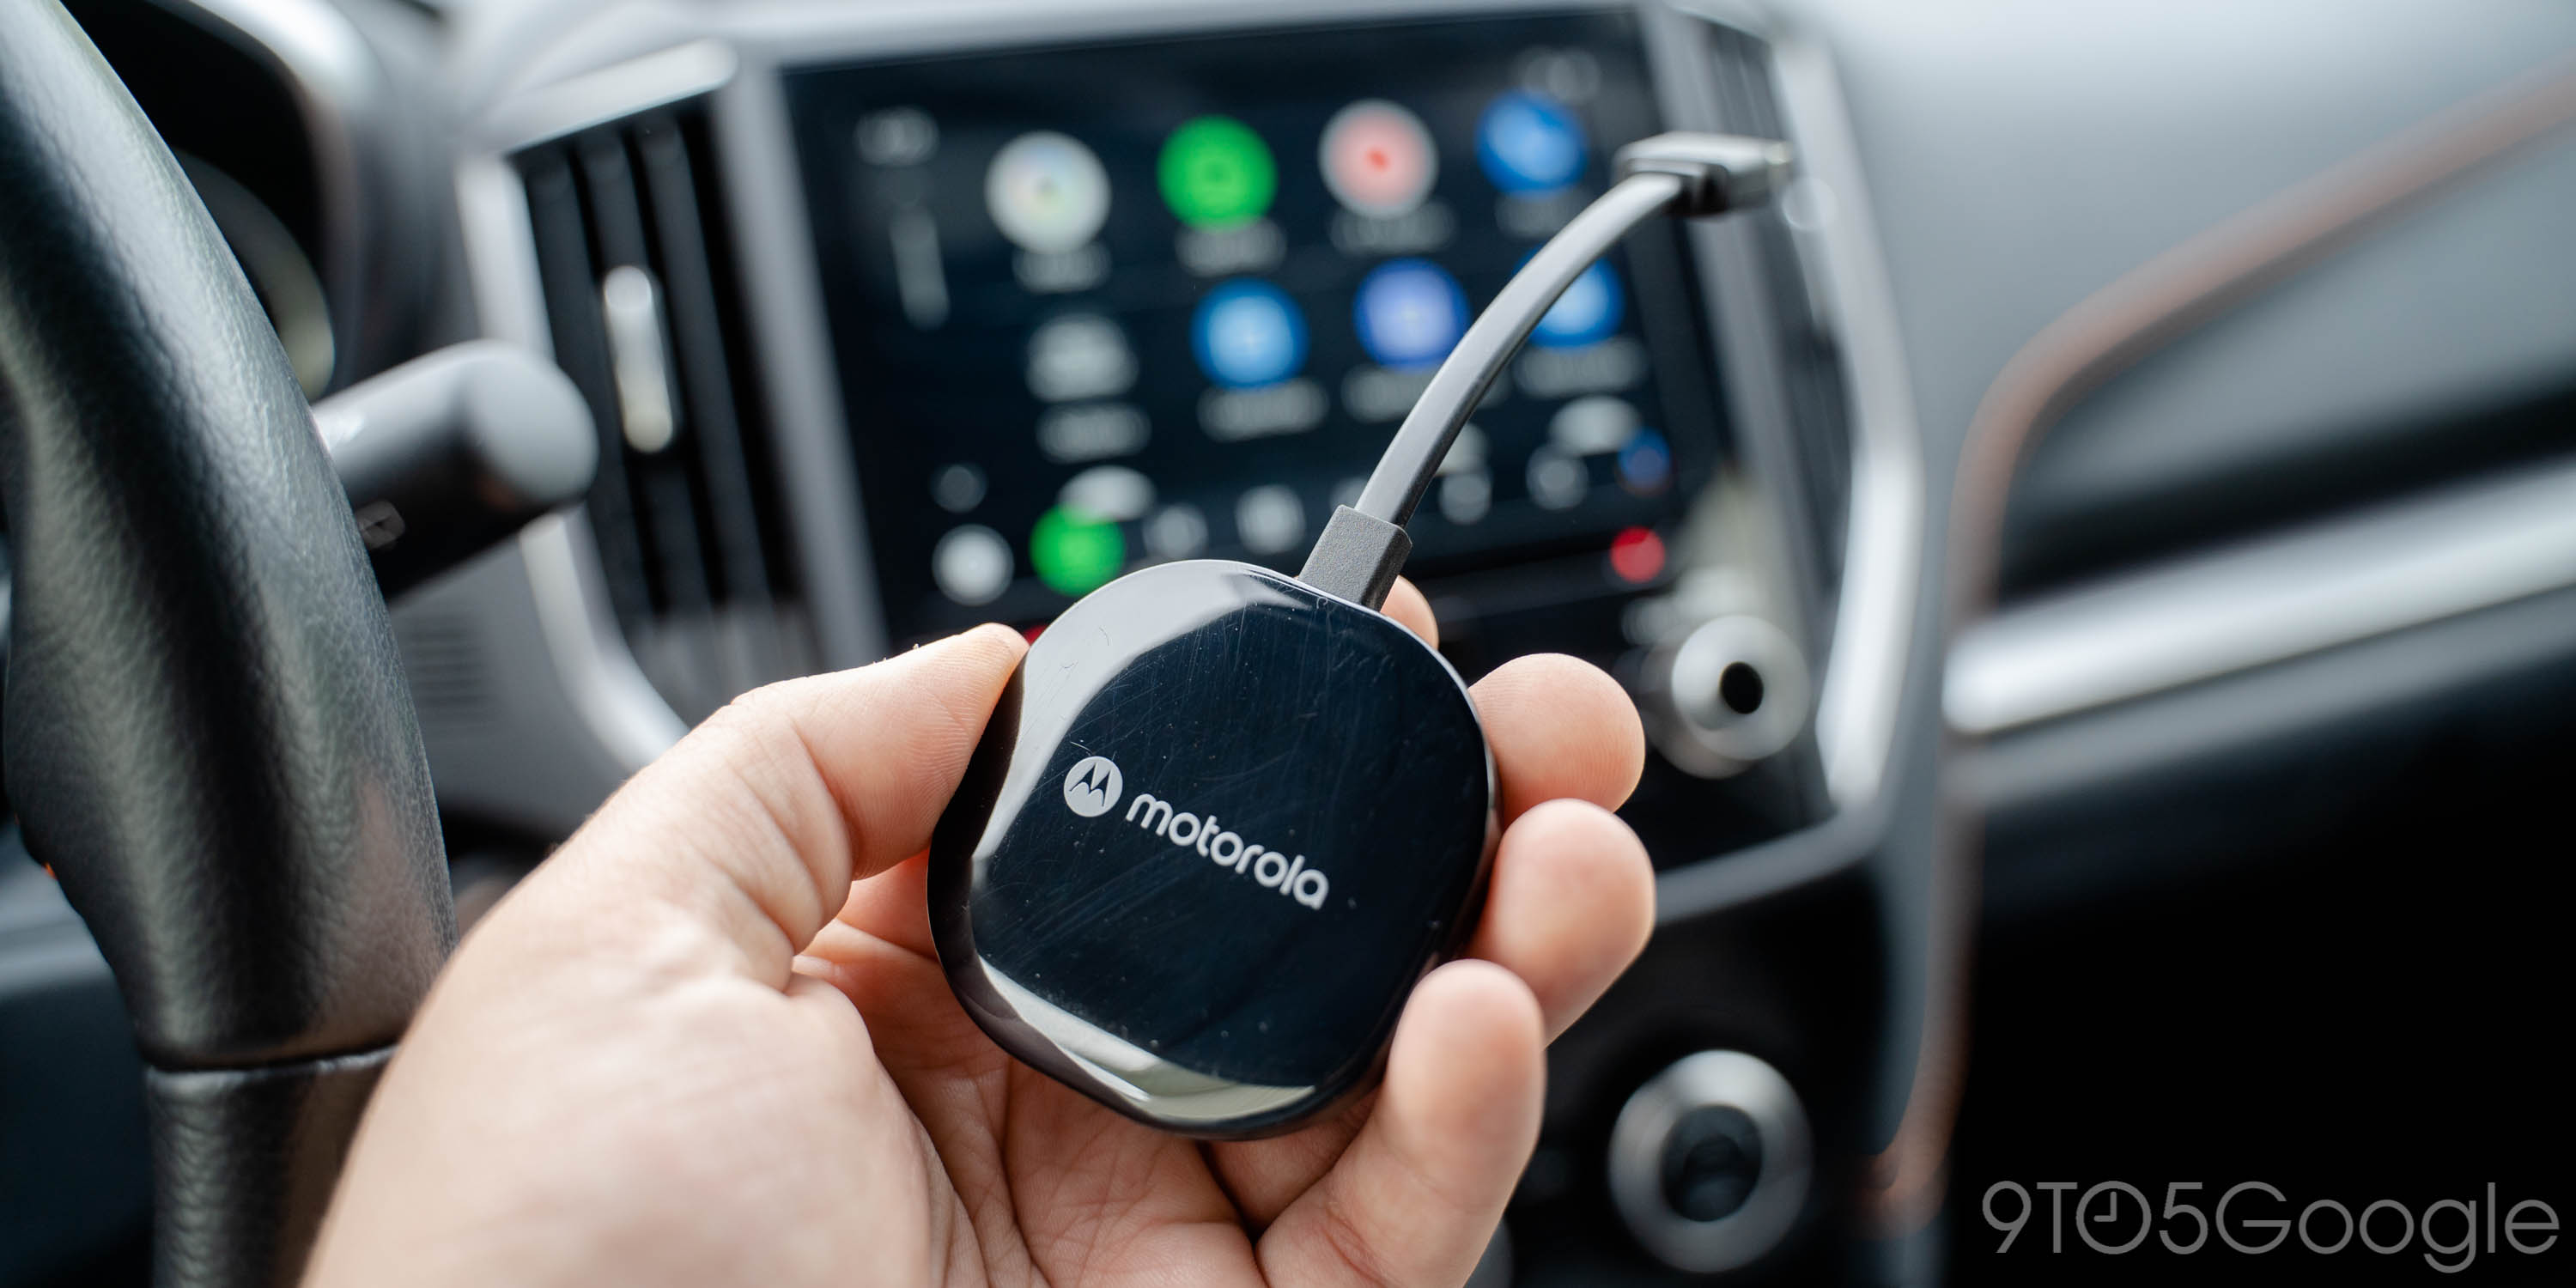 Motorola MA1 hands-on: Dead simple wireless Android Auto - 9to5Google